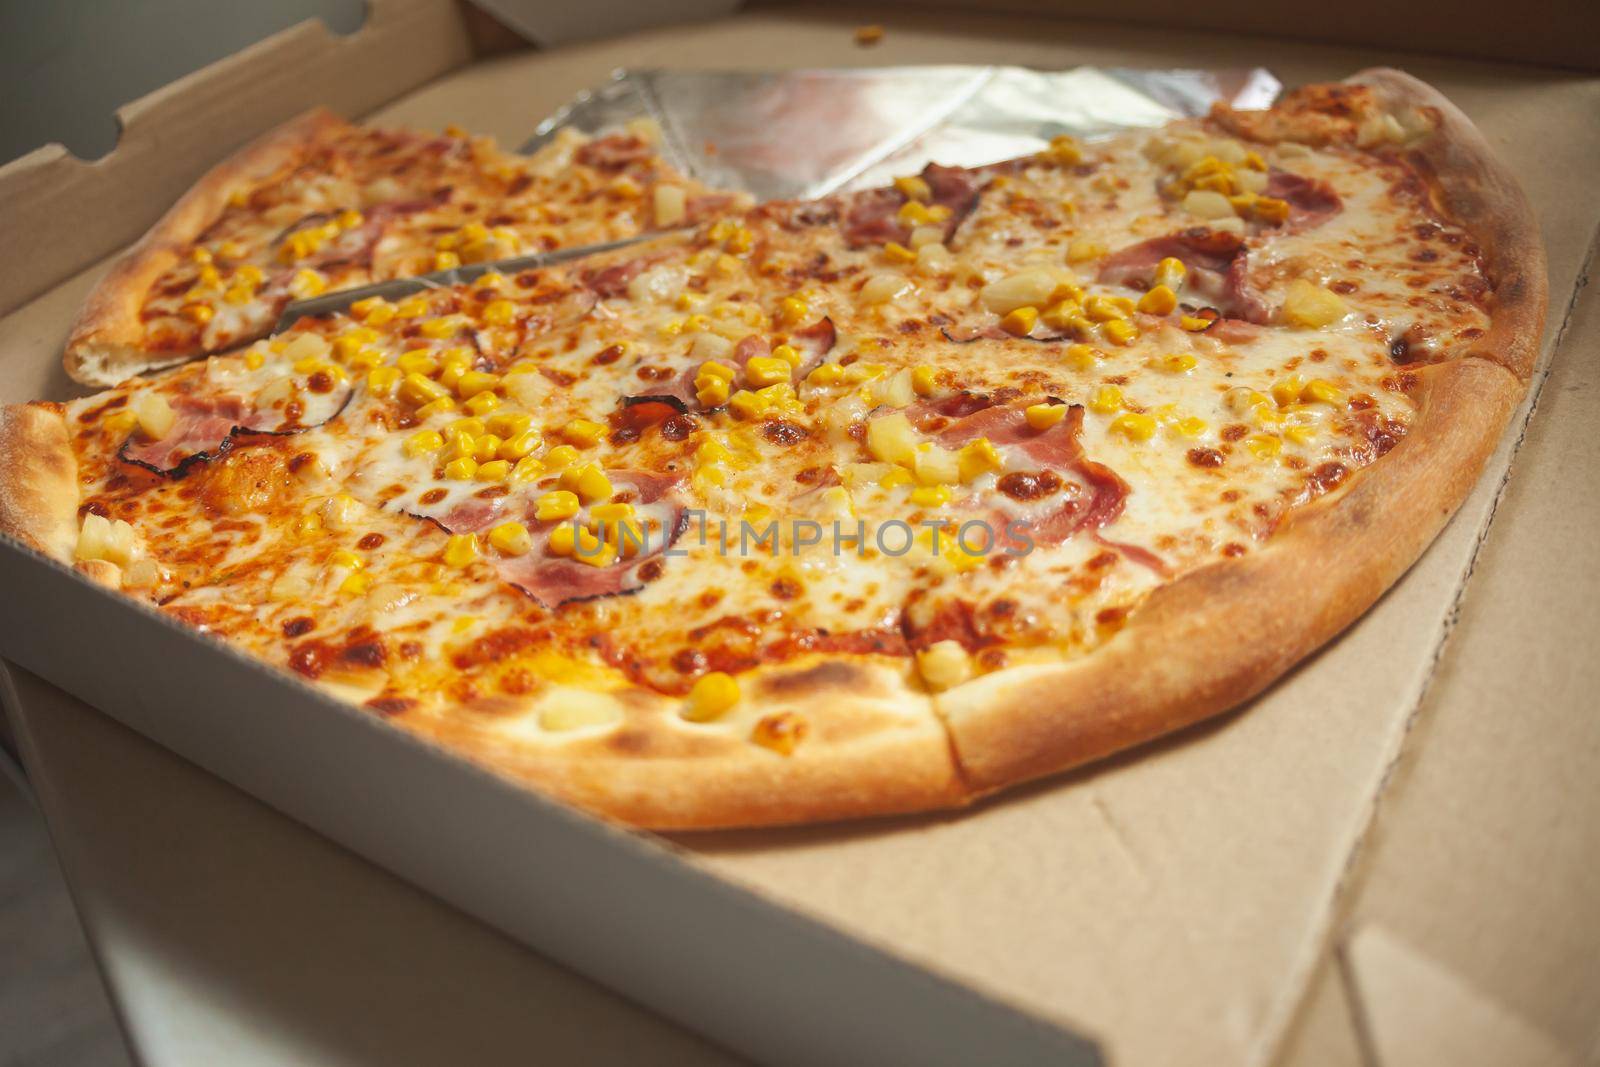 Large pizza pieces delivered in an open box